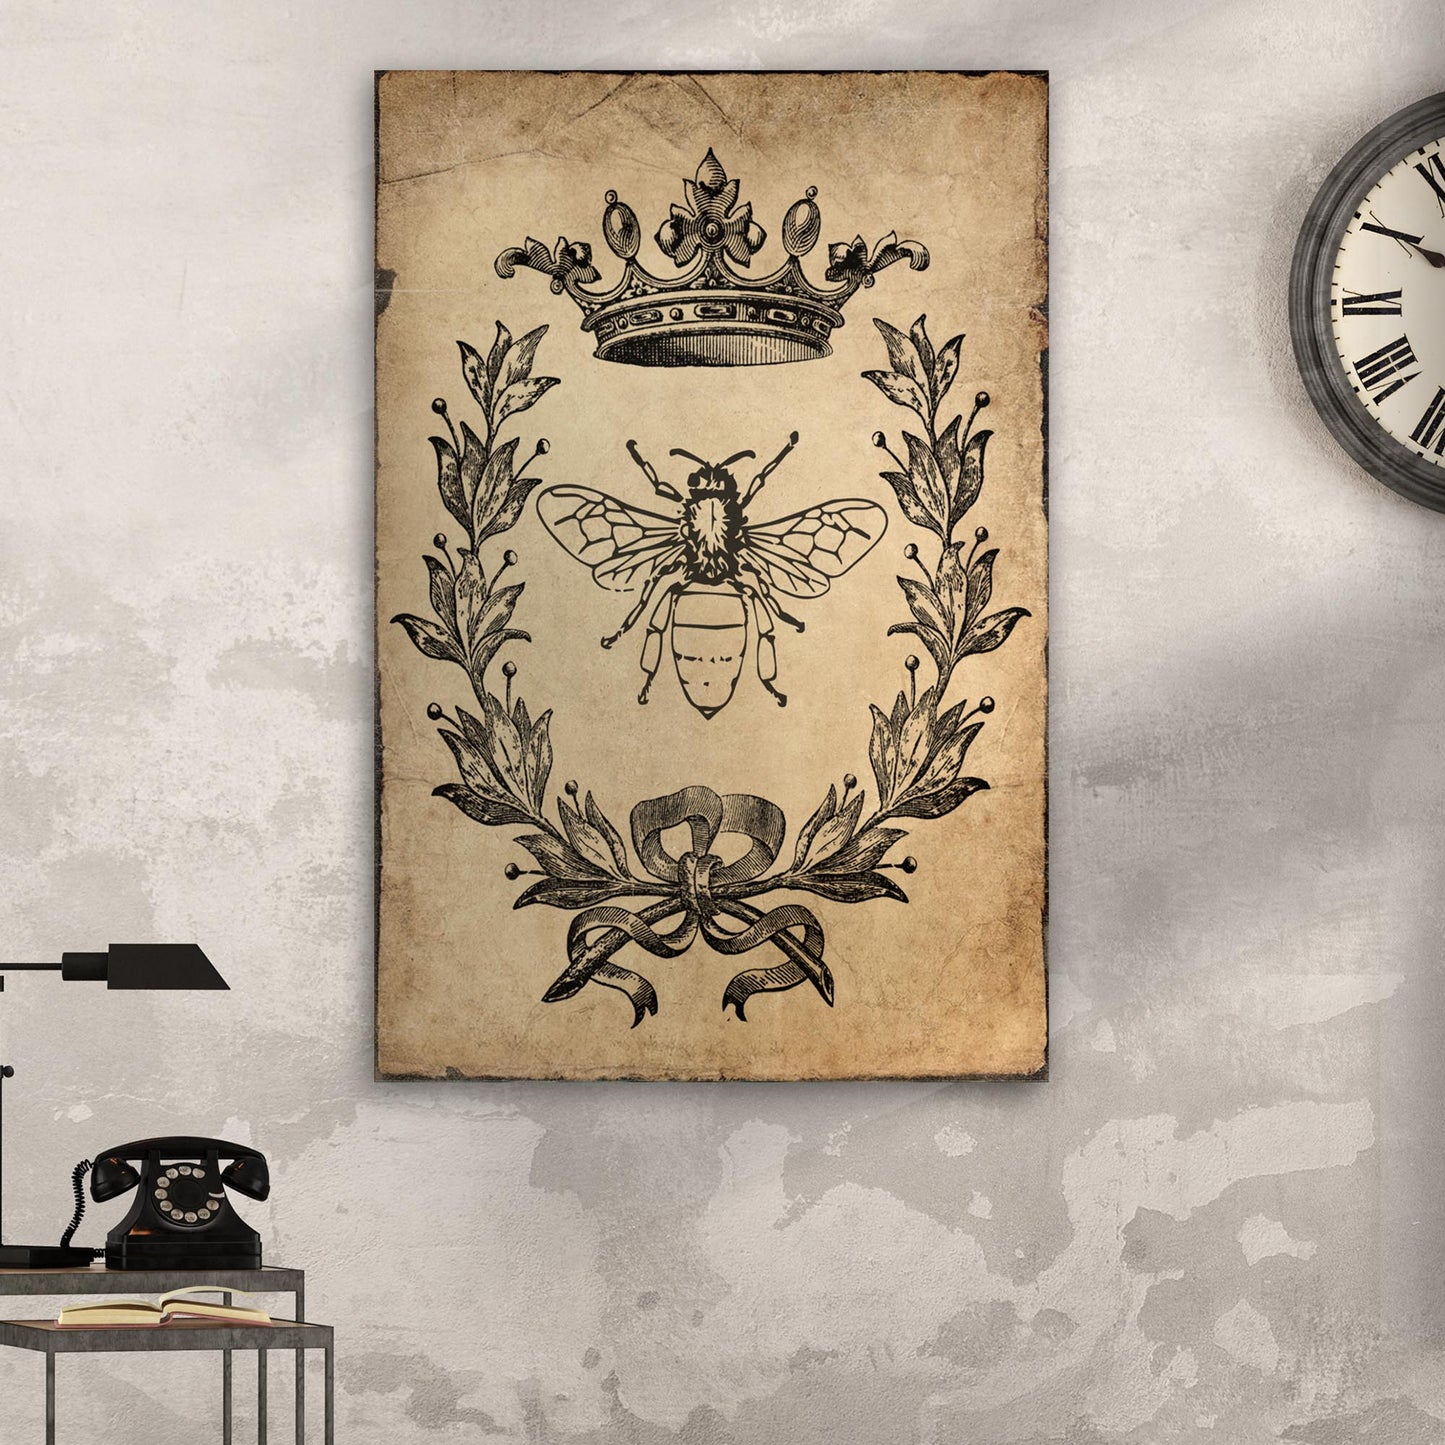 Queen Bee Vintage Painting Canvas Wall Art - Image by Tailored Canvases